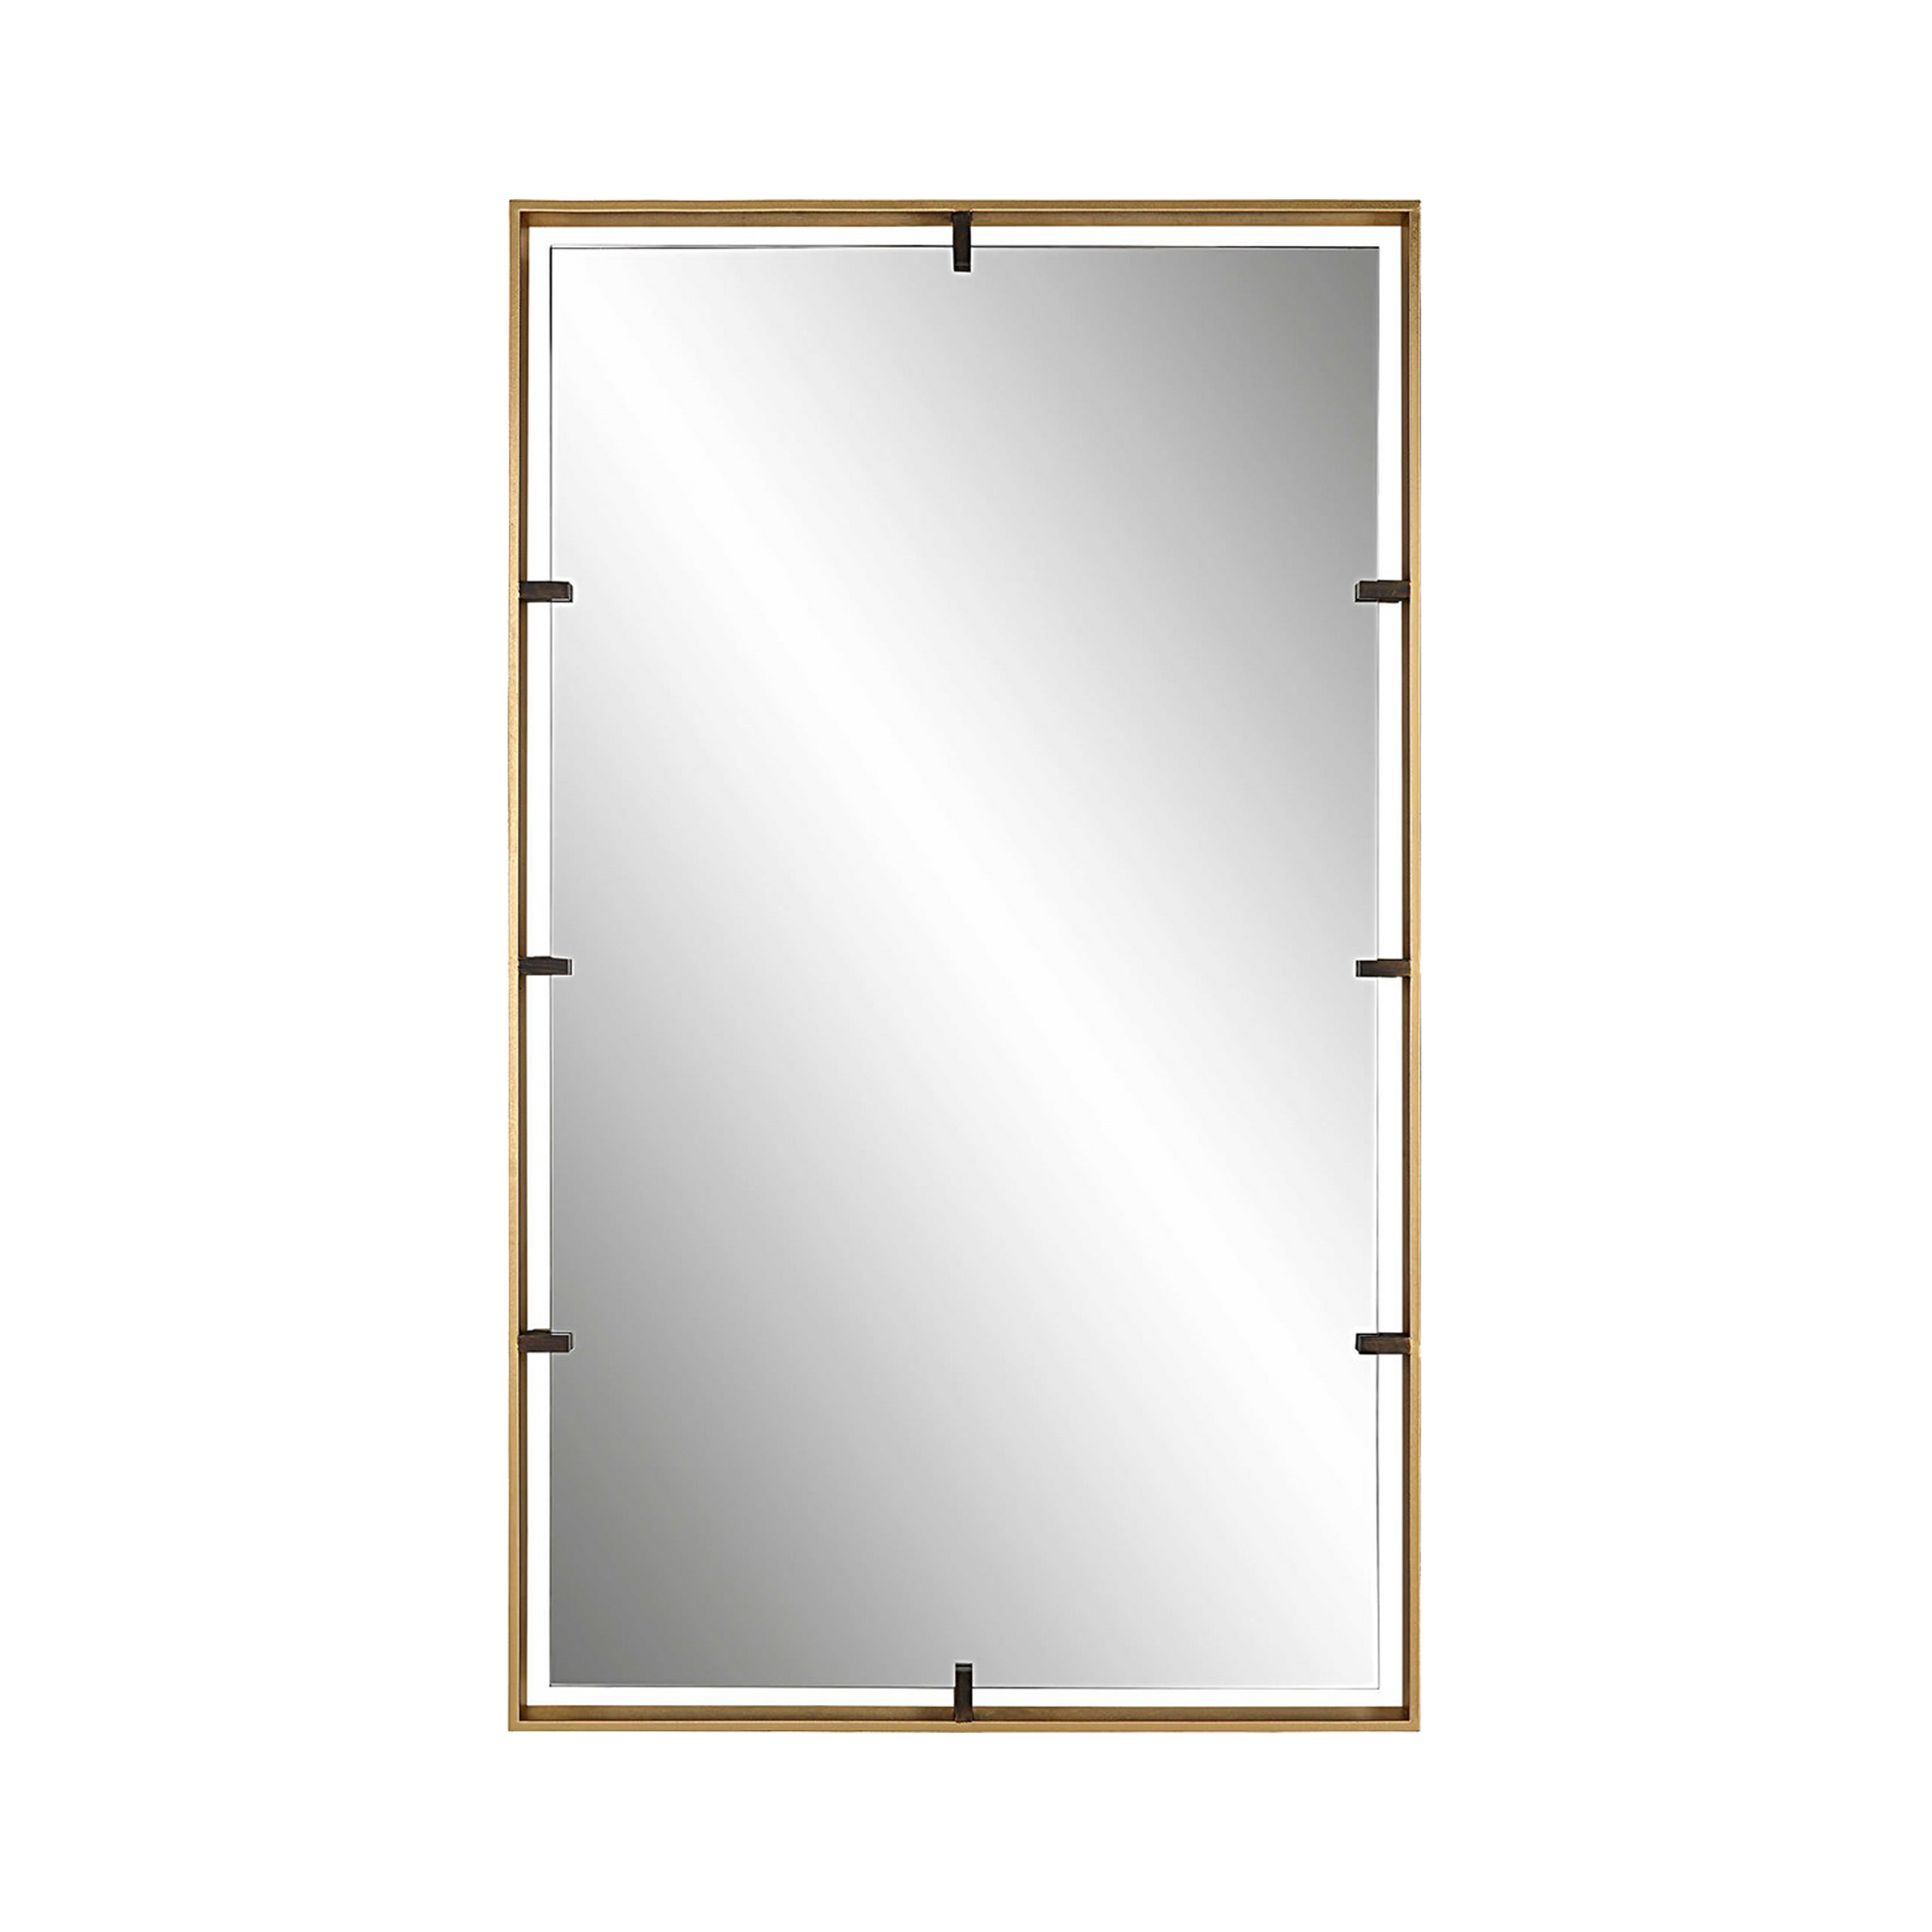 This mirror displays a 3-dimensional design with an outer iron frame finished in warm gold, surrounding a floating mirror held by aged bronze clips.